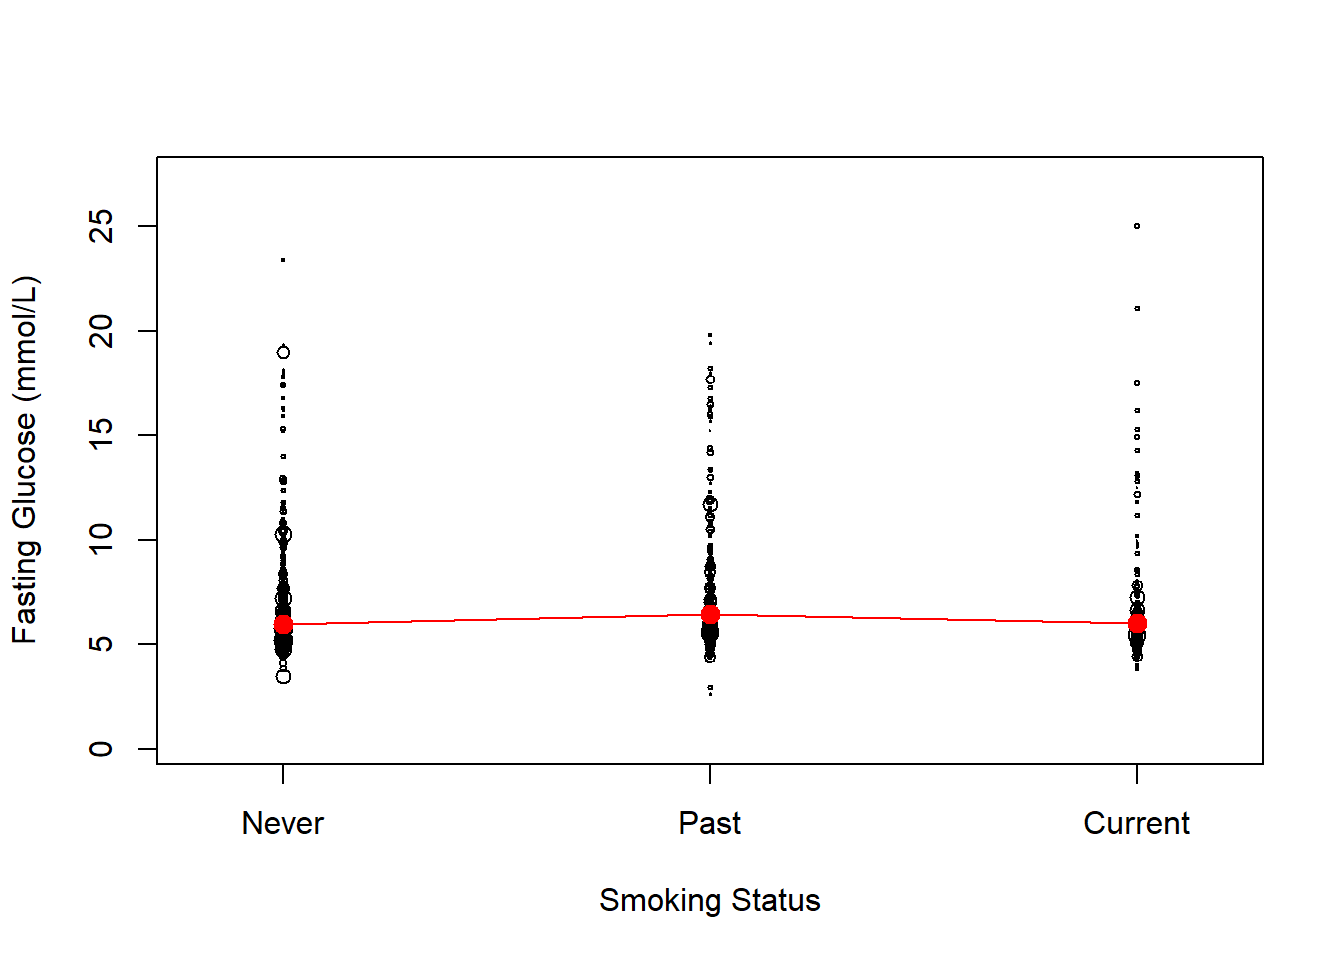 Weighted plot of outcome vs. a categorical predictor